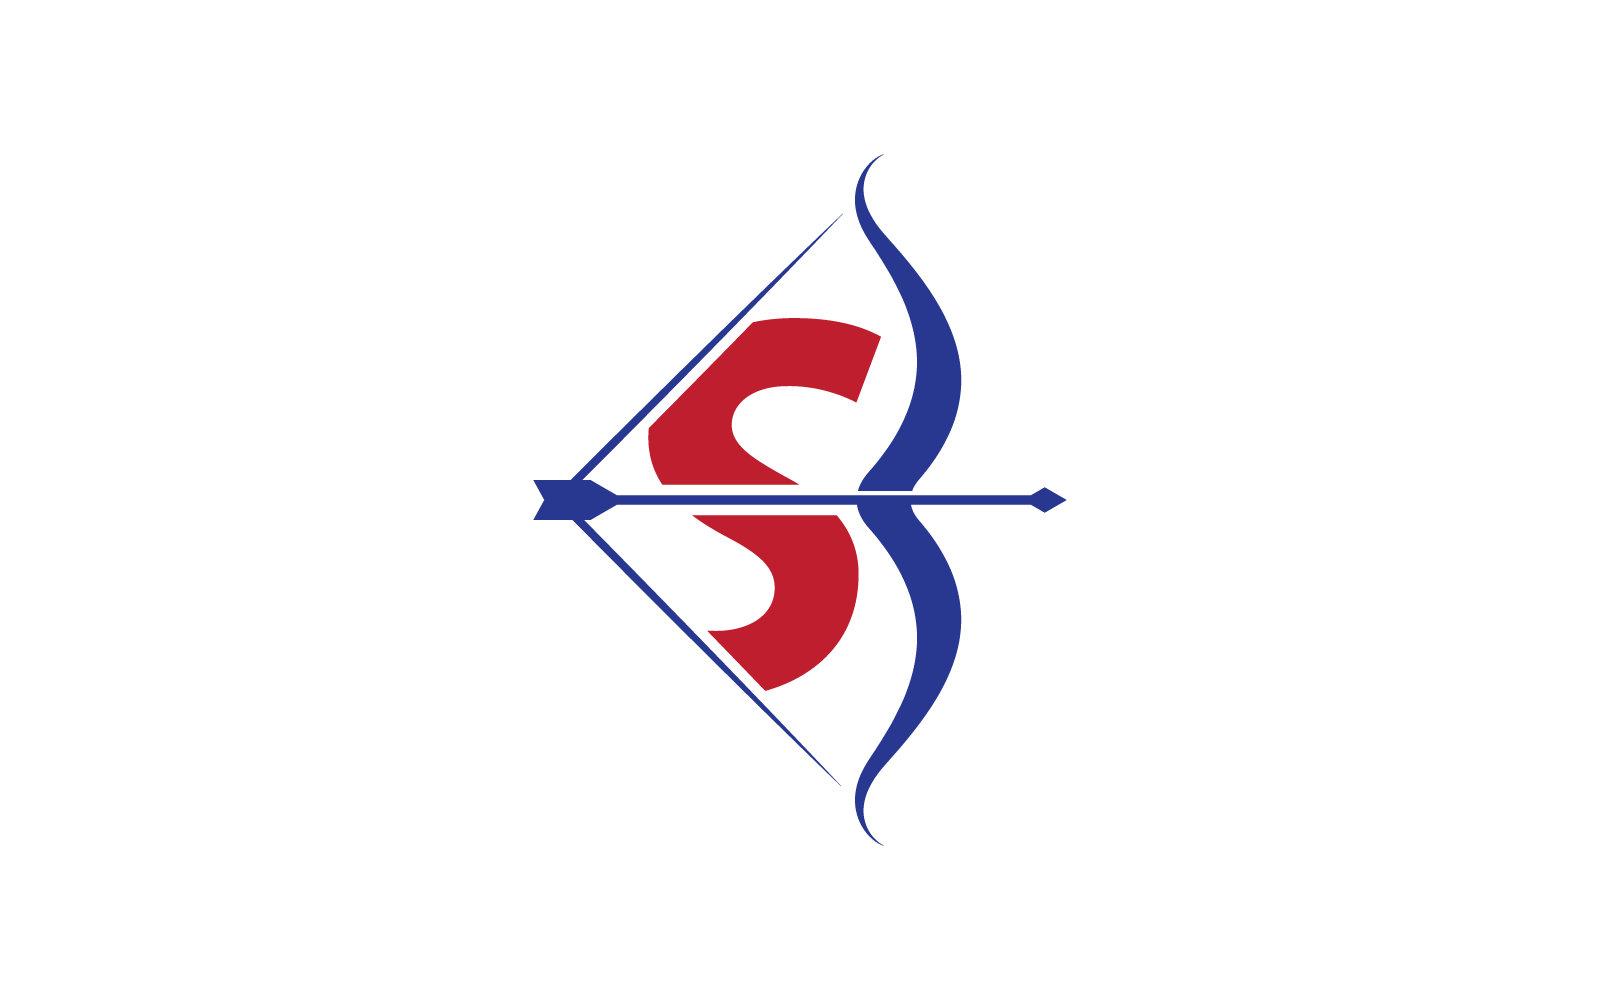 Archery logo With S initial letter vector ilustration flat design